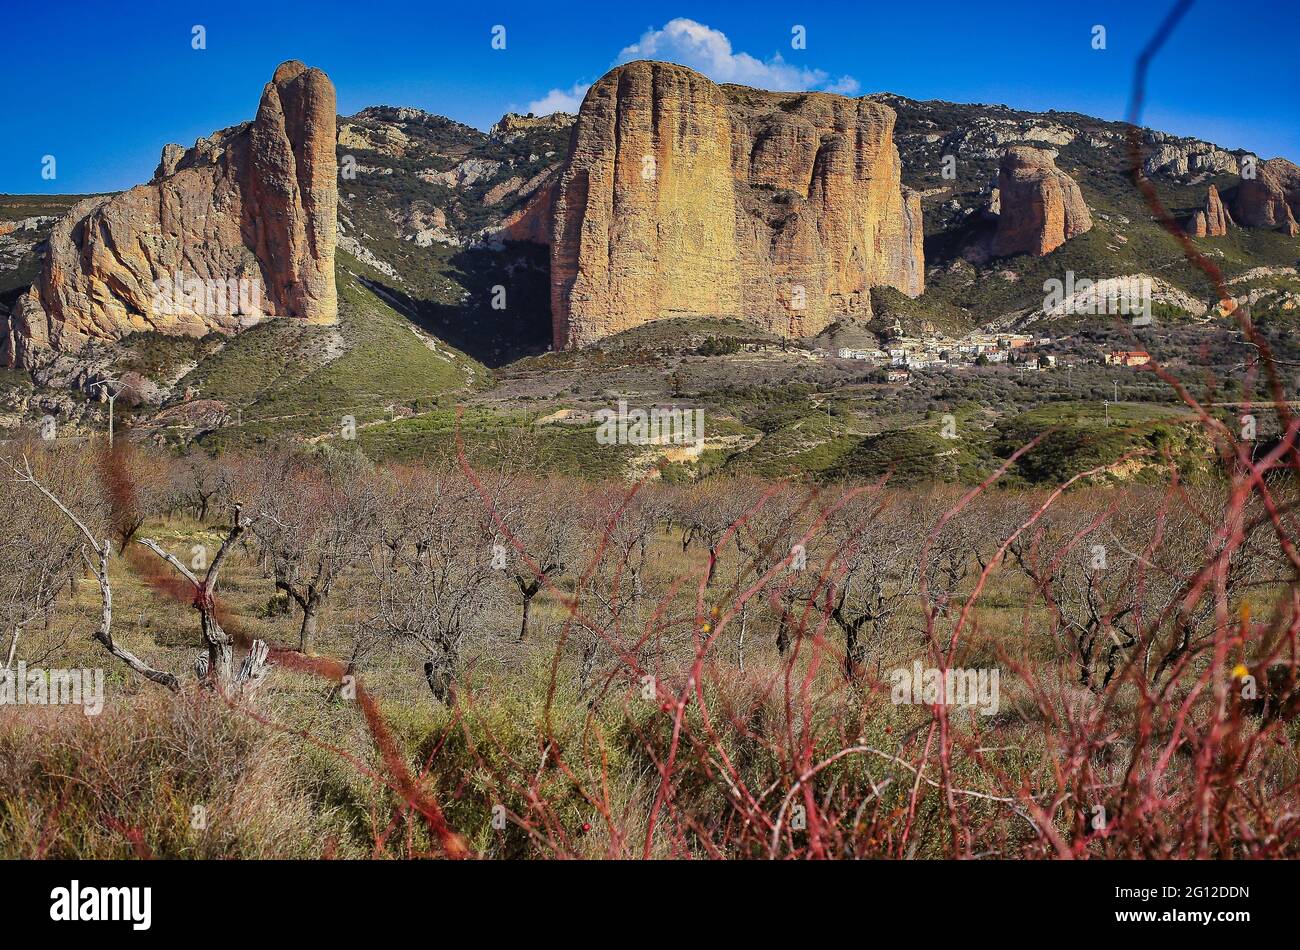 The Riglos mallos are geological formations consisting of vertical-walled rocks, called mallos, located in the Spanish town of Riglos, in the Stock Photo